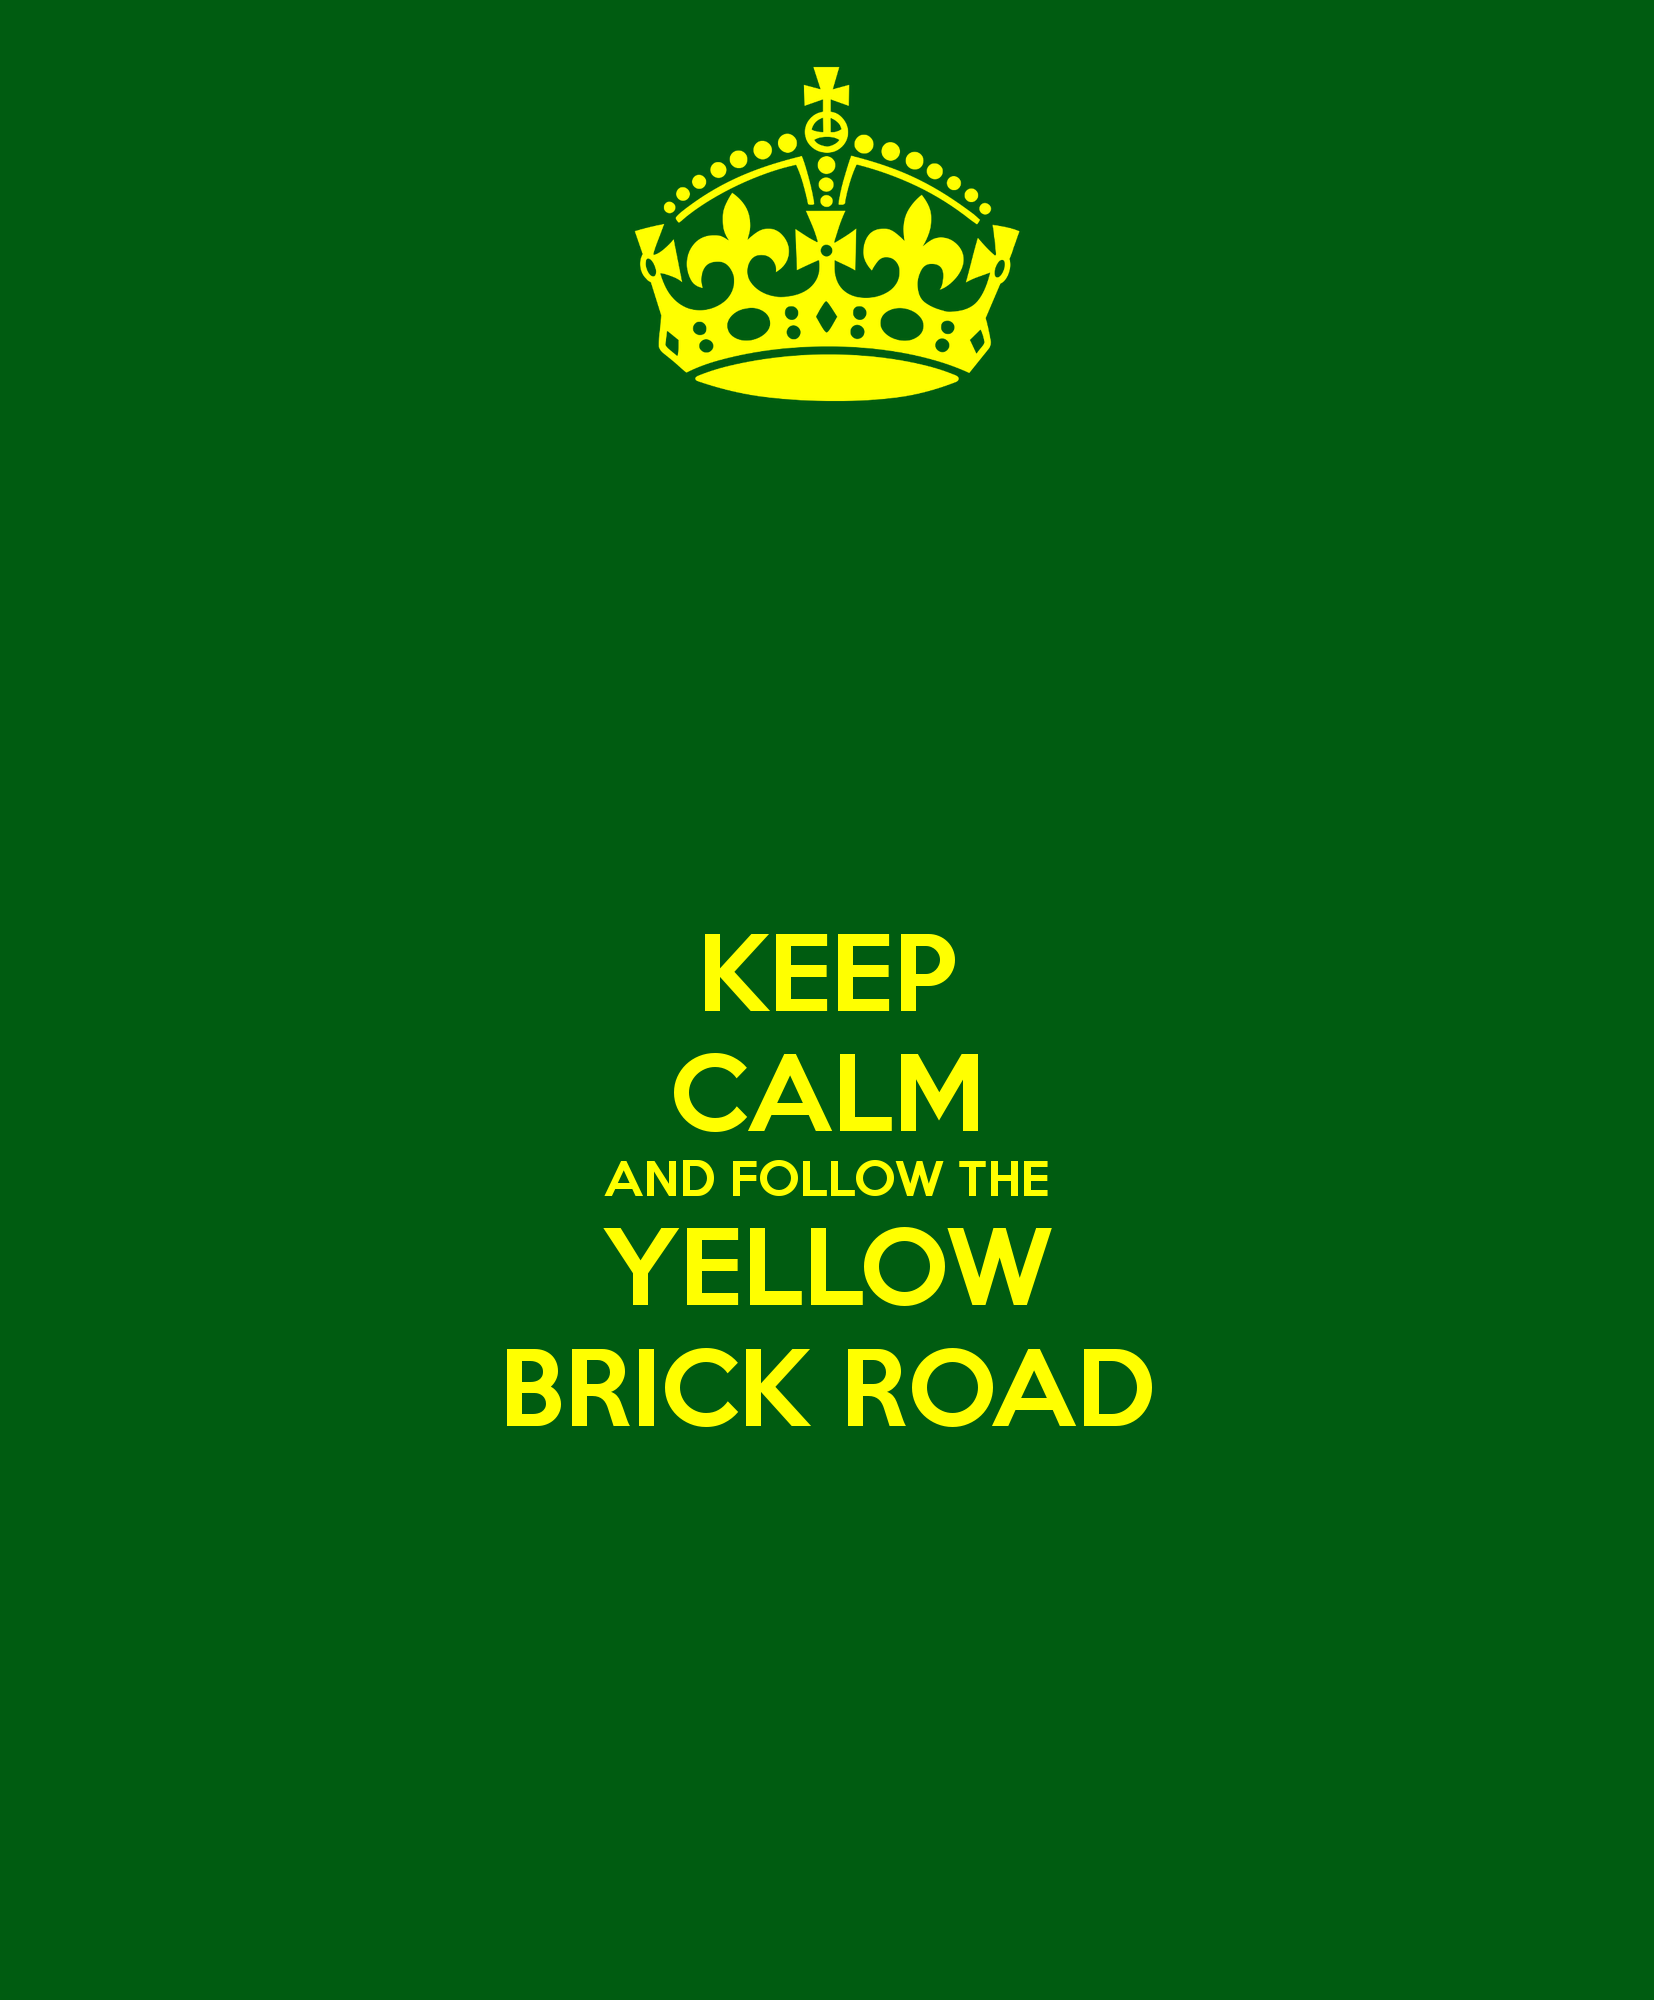 KEEP CALM AND FOLLOW THE YELLOW BRICK ROAD   KEEP CALM AND CARRY ON